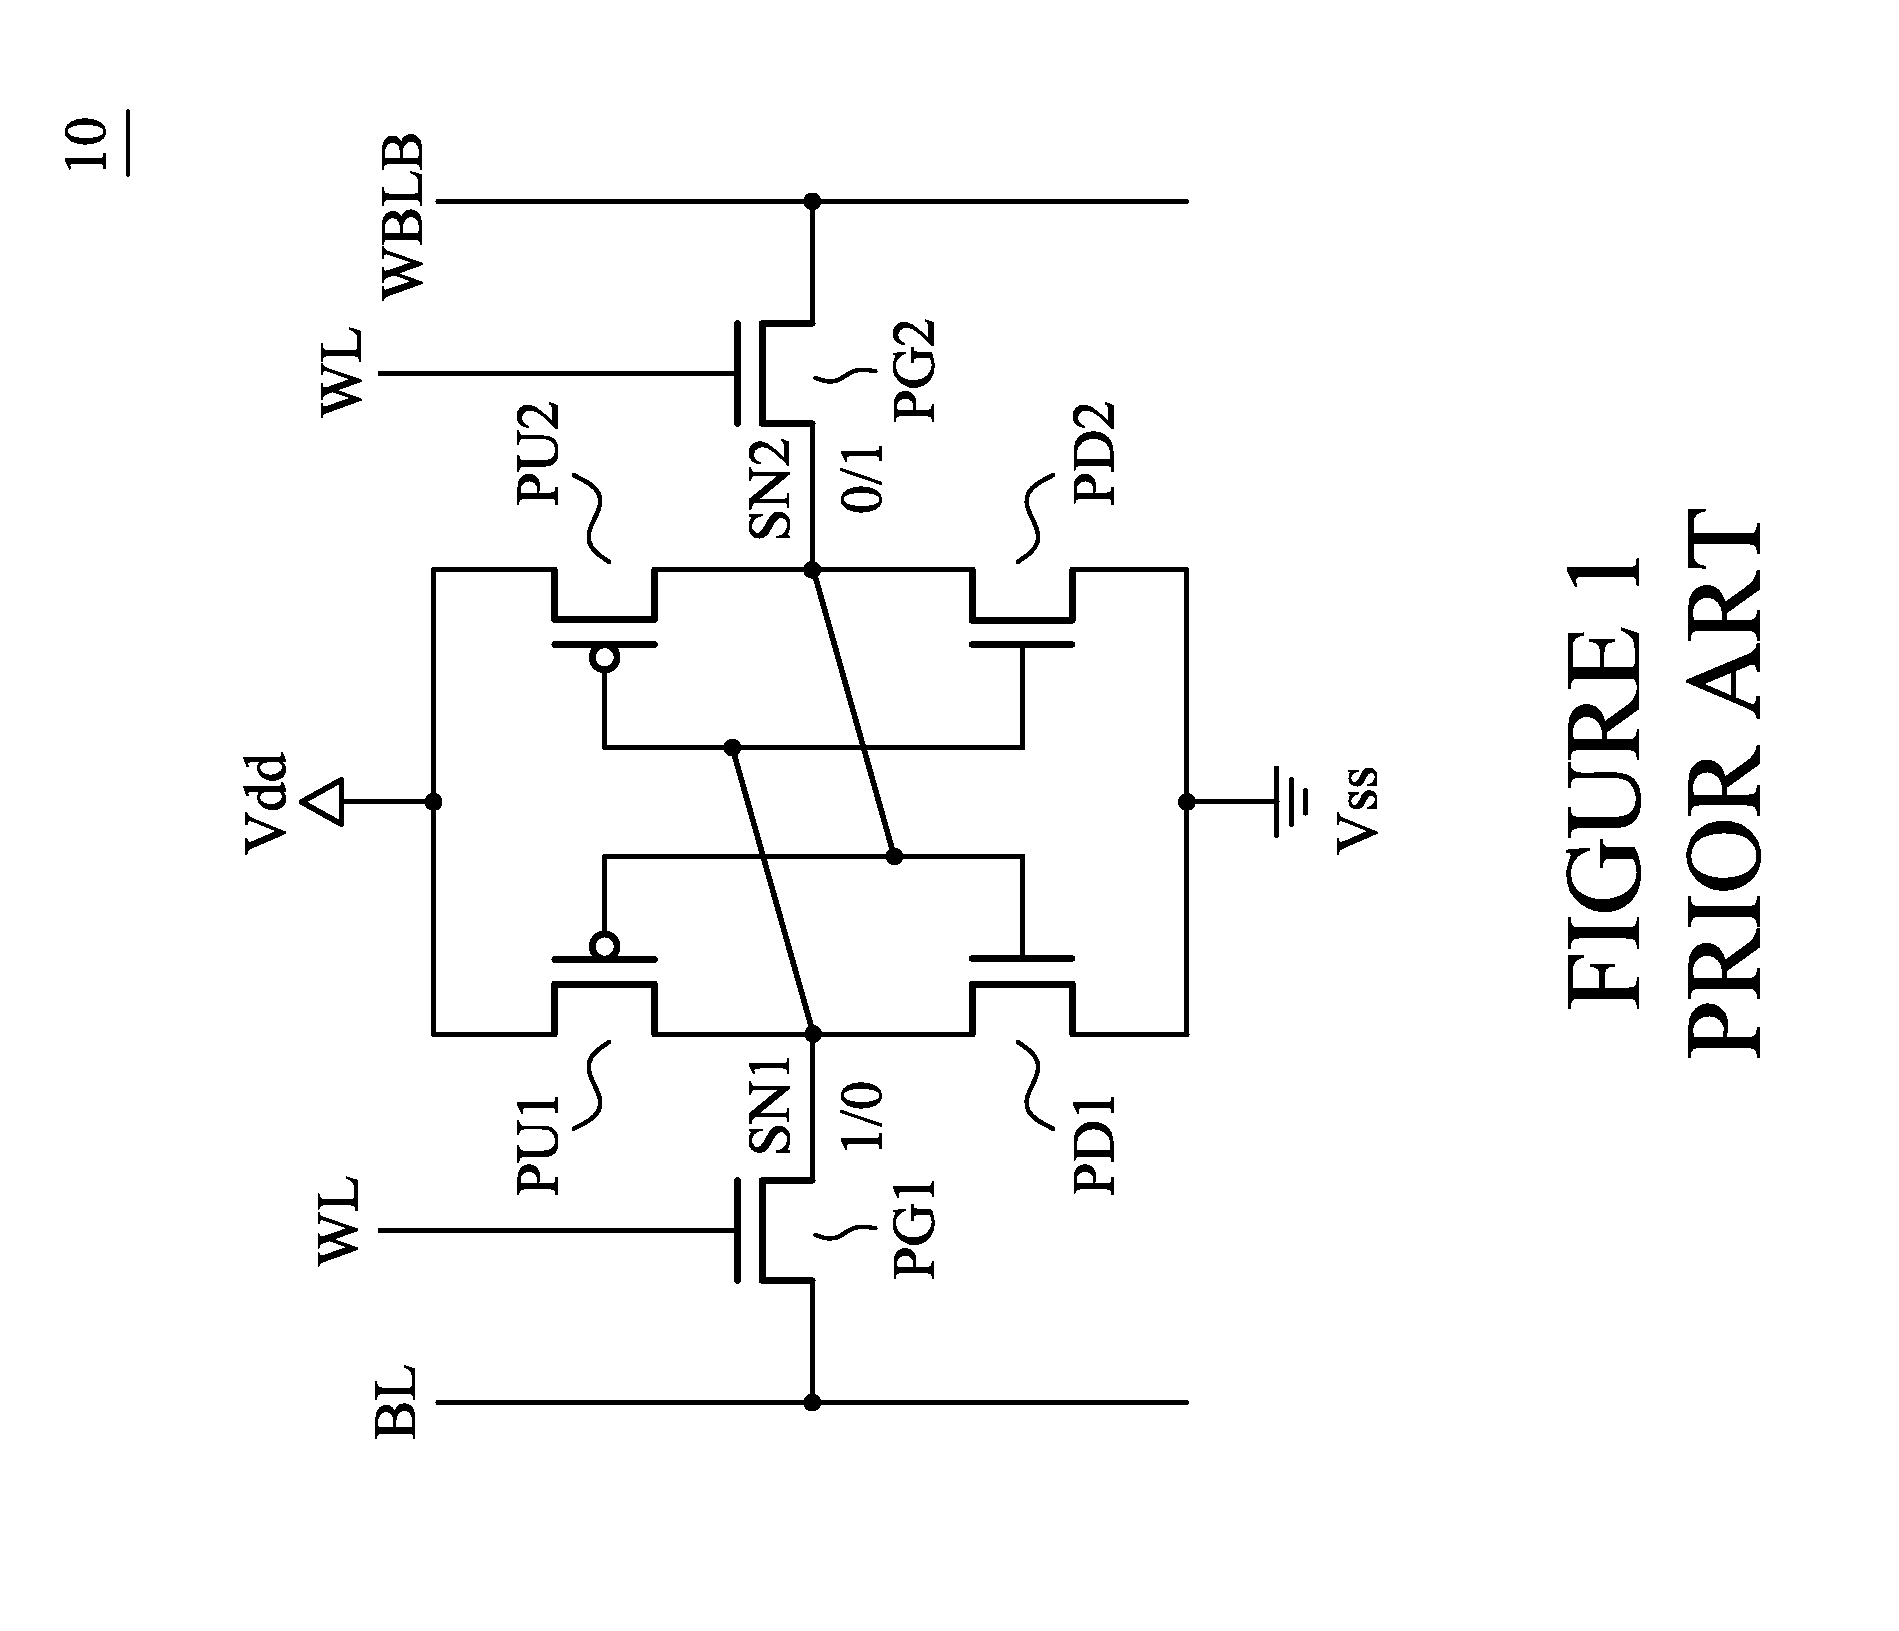 Methods and apparatus for SRAM bit cell with low standby current, low supply voltage and high speed